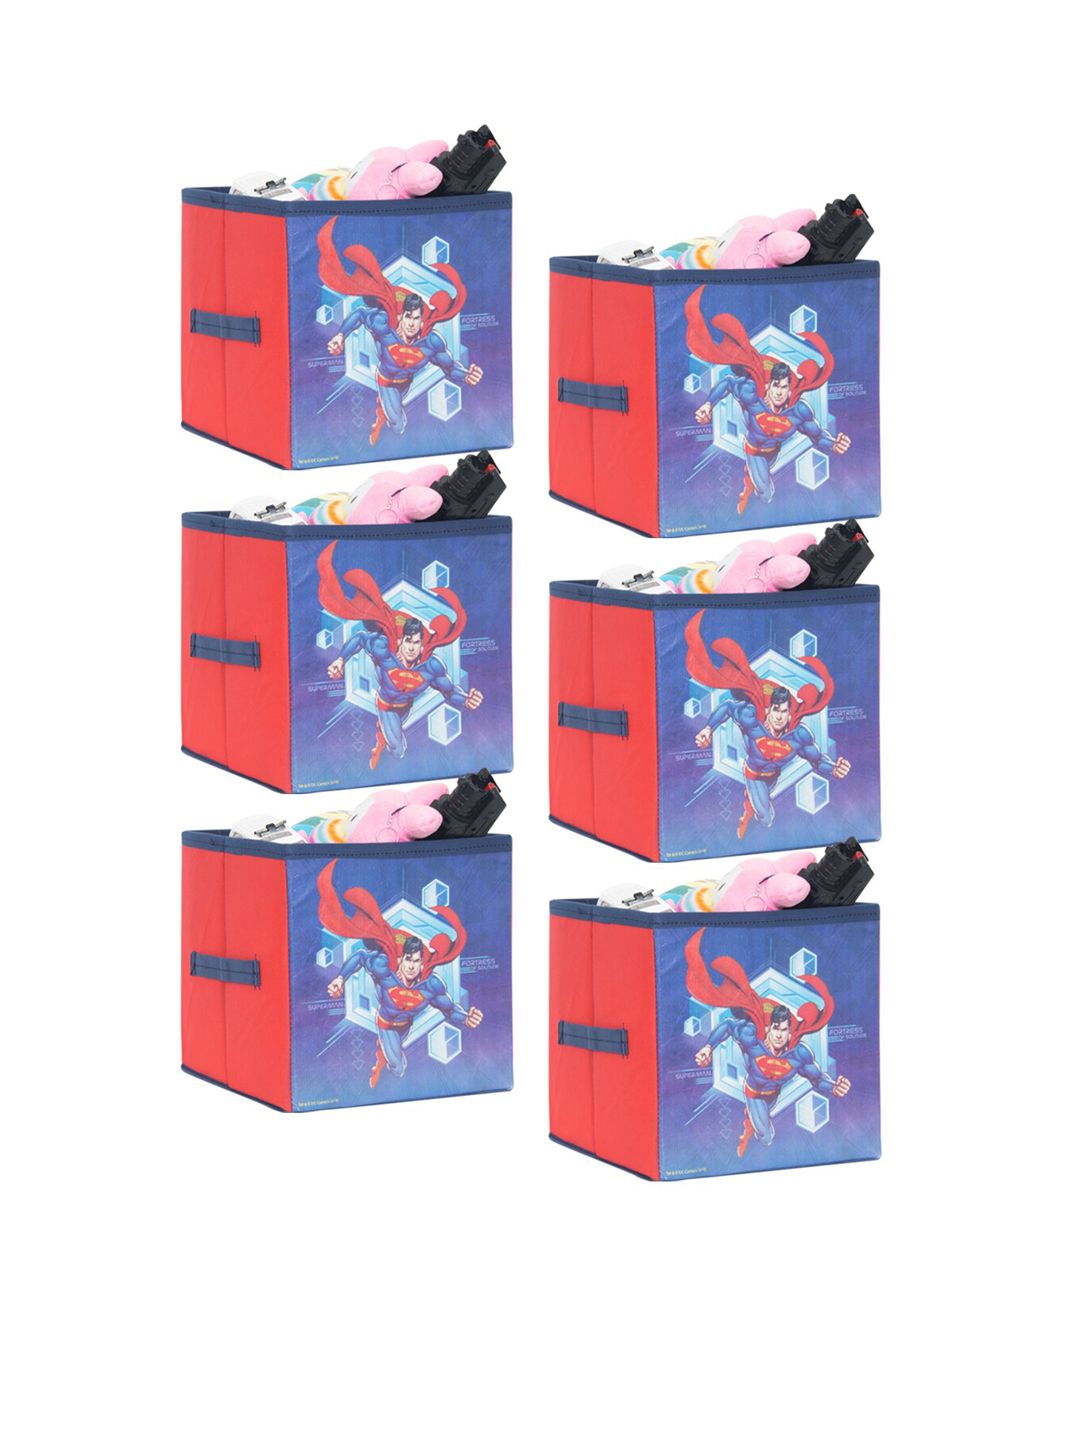 prettykrafts Red & Blue Set of 6 Superman Printed Foldable Toys Organizer Storage Box Price in India